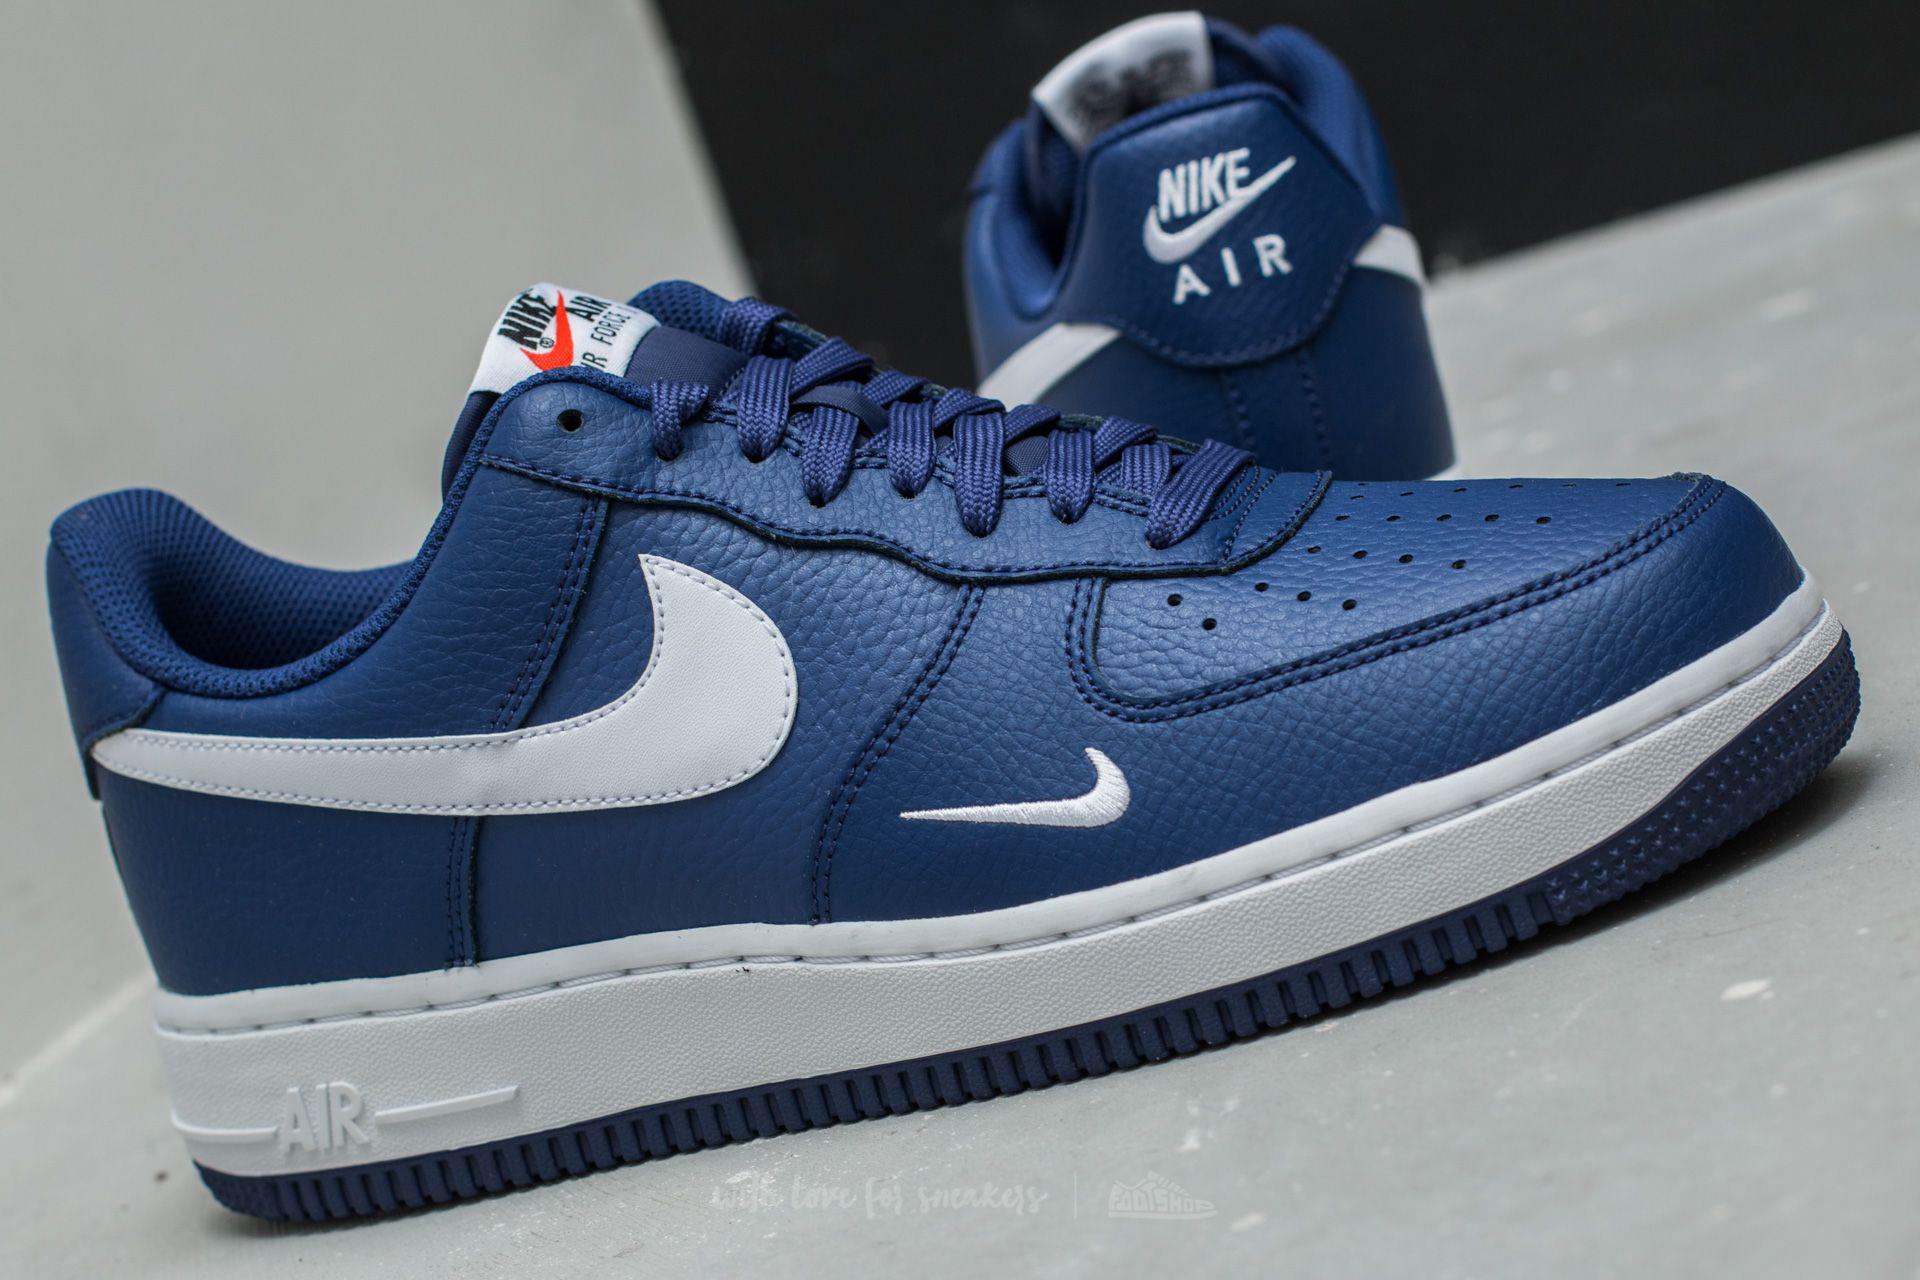 Nike Air Force 1 Deep Royal Blue Outlet Prices, Save 44% | jlcatj.gob.mx